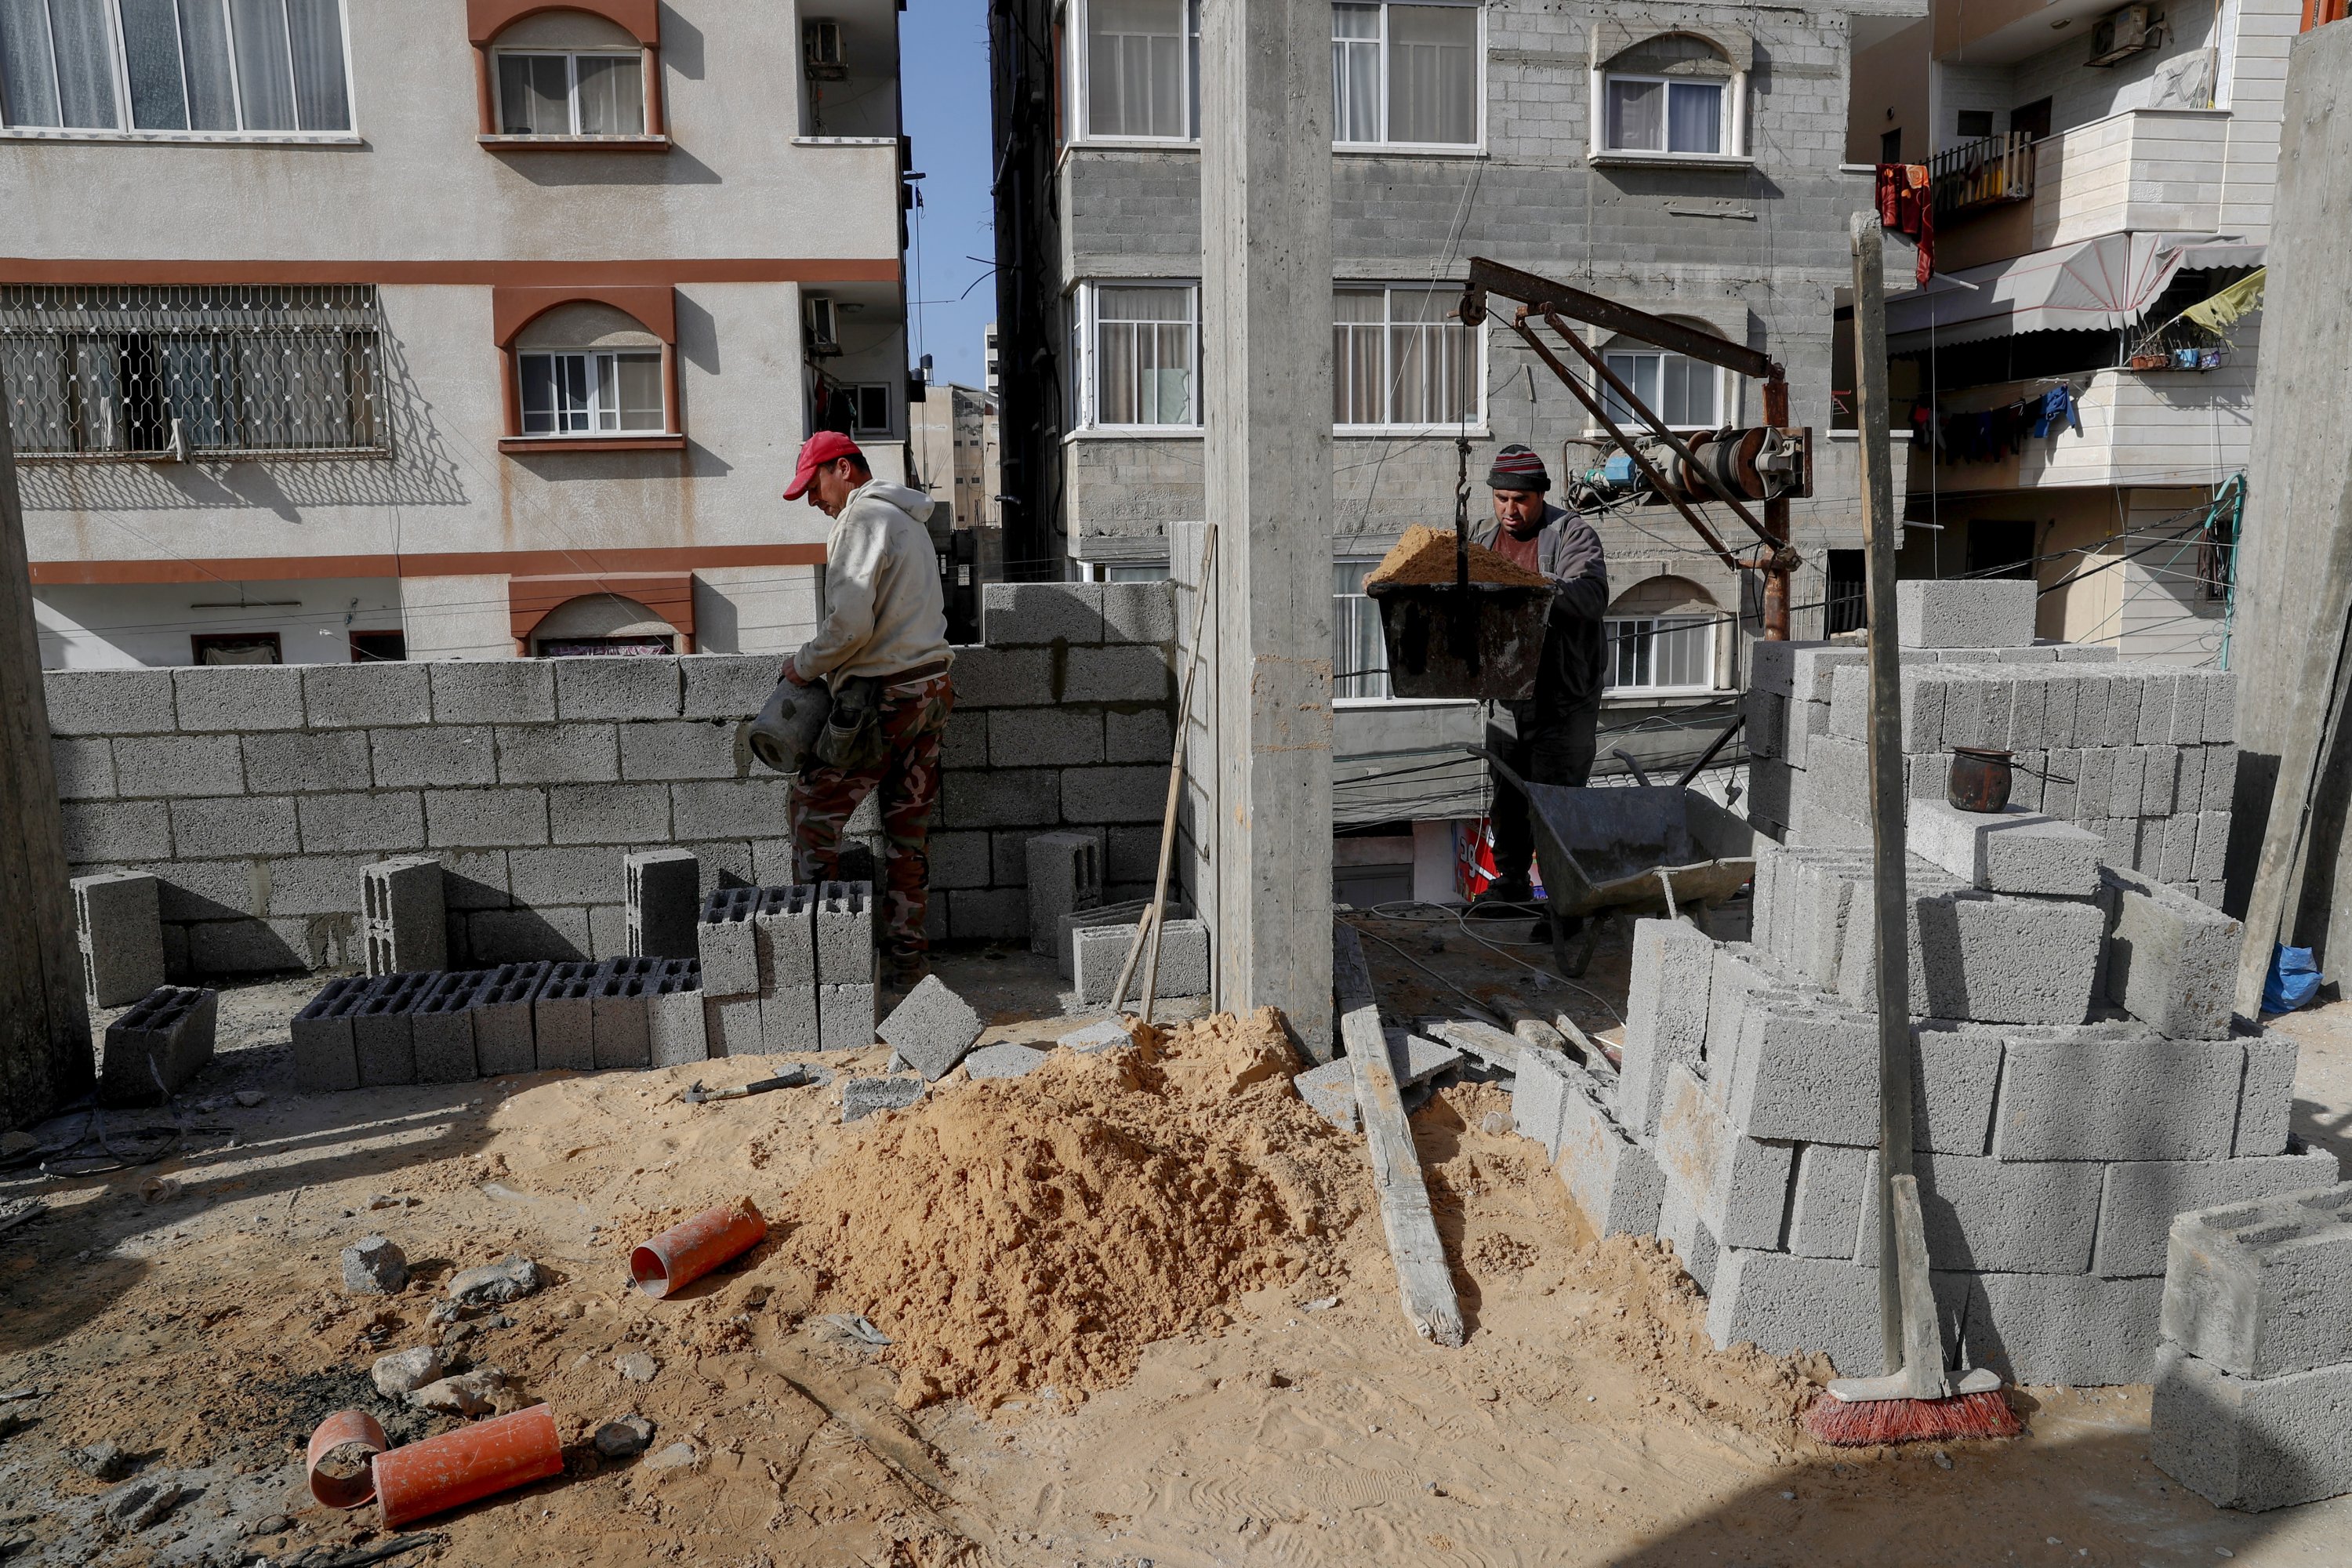 Palestinians build walls of a new apartment building in the central of al-Rimal neighborhood of Gaza City, Jan. 10, 2022. (AP Photo)